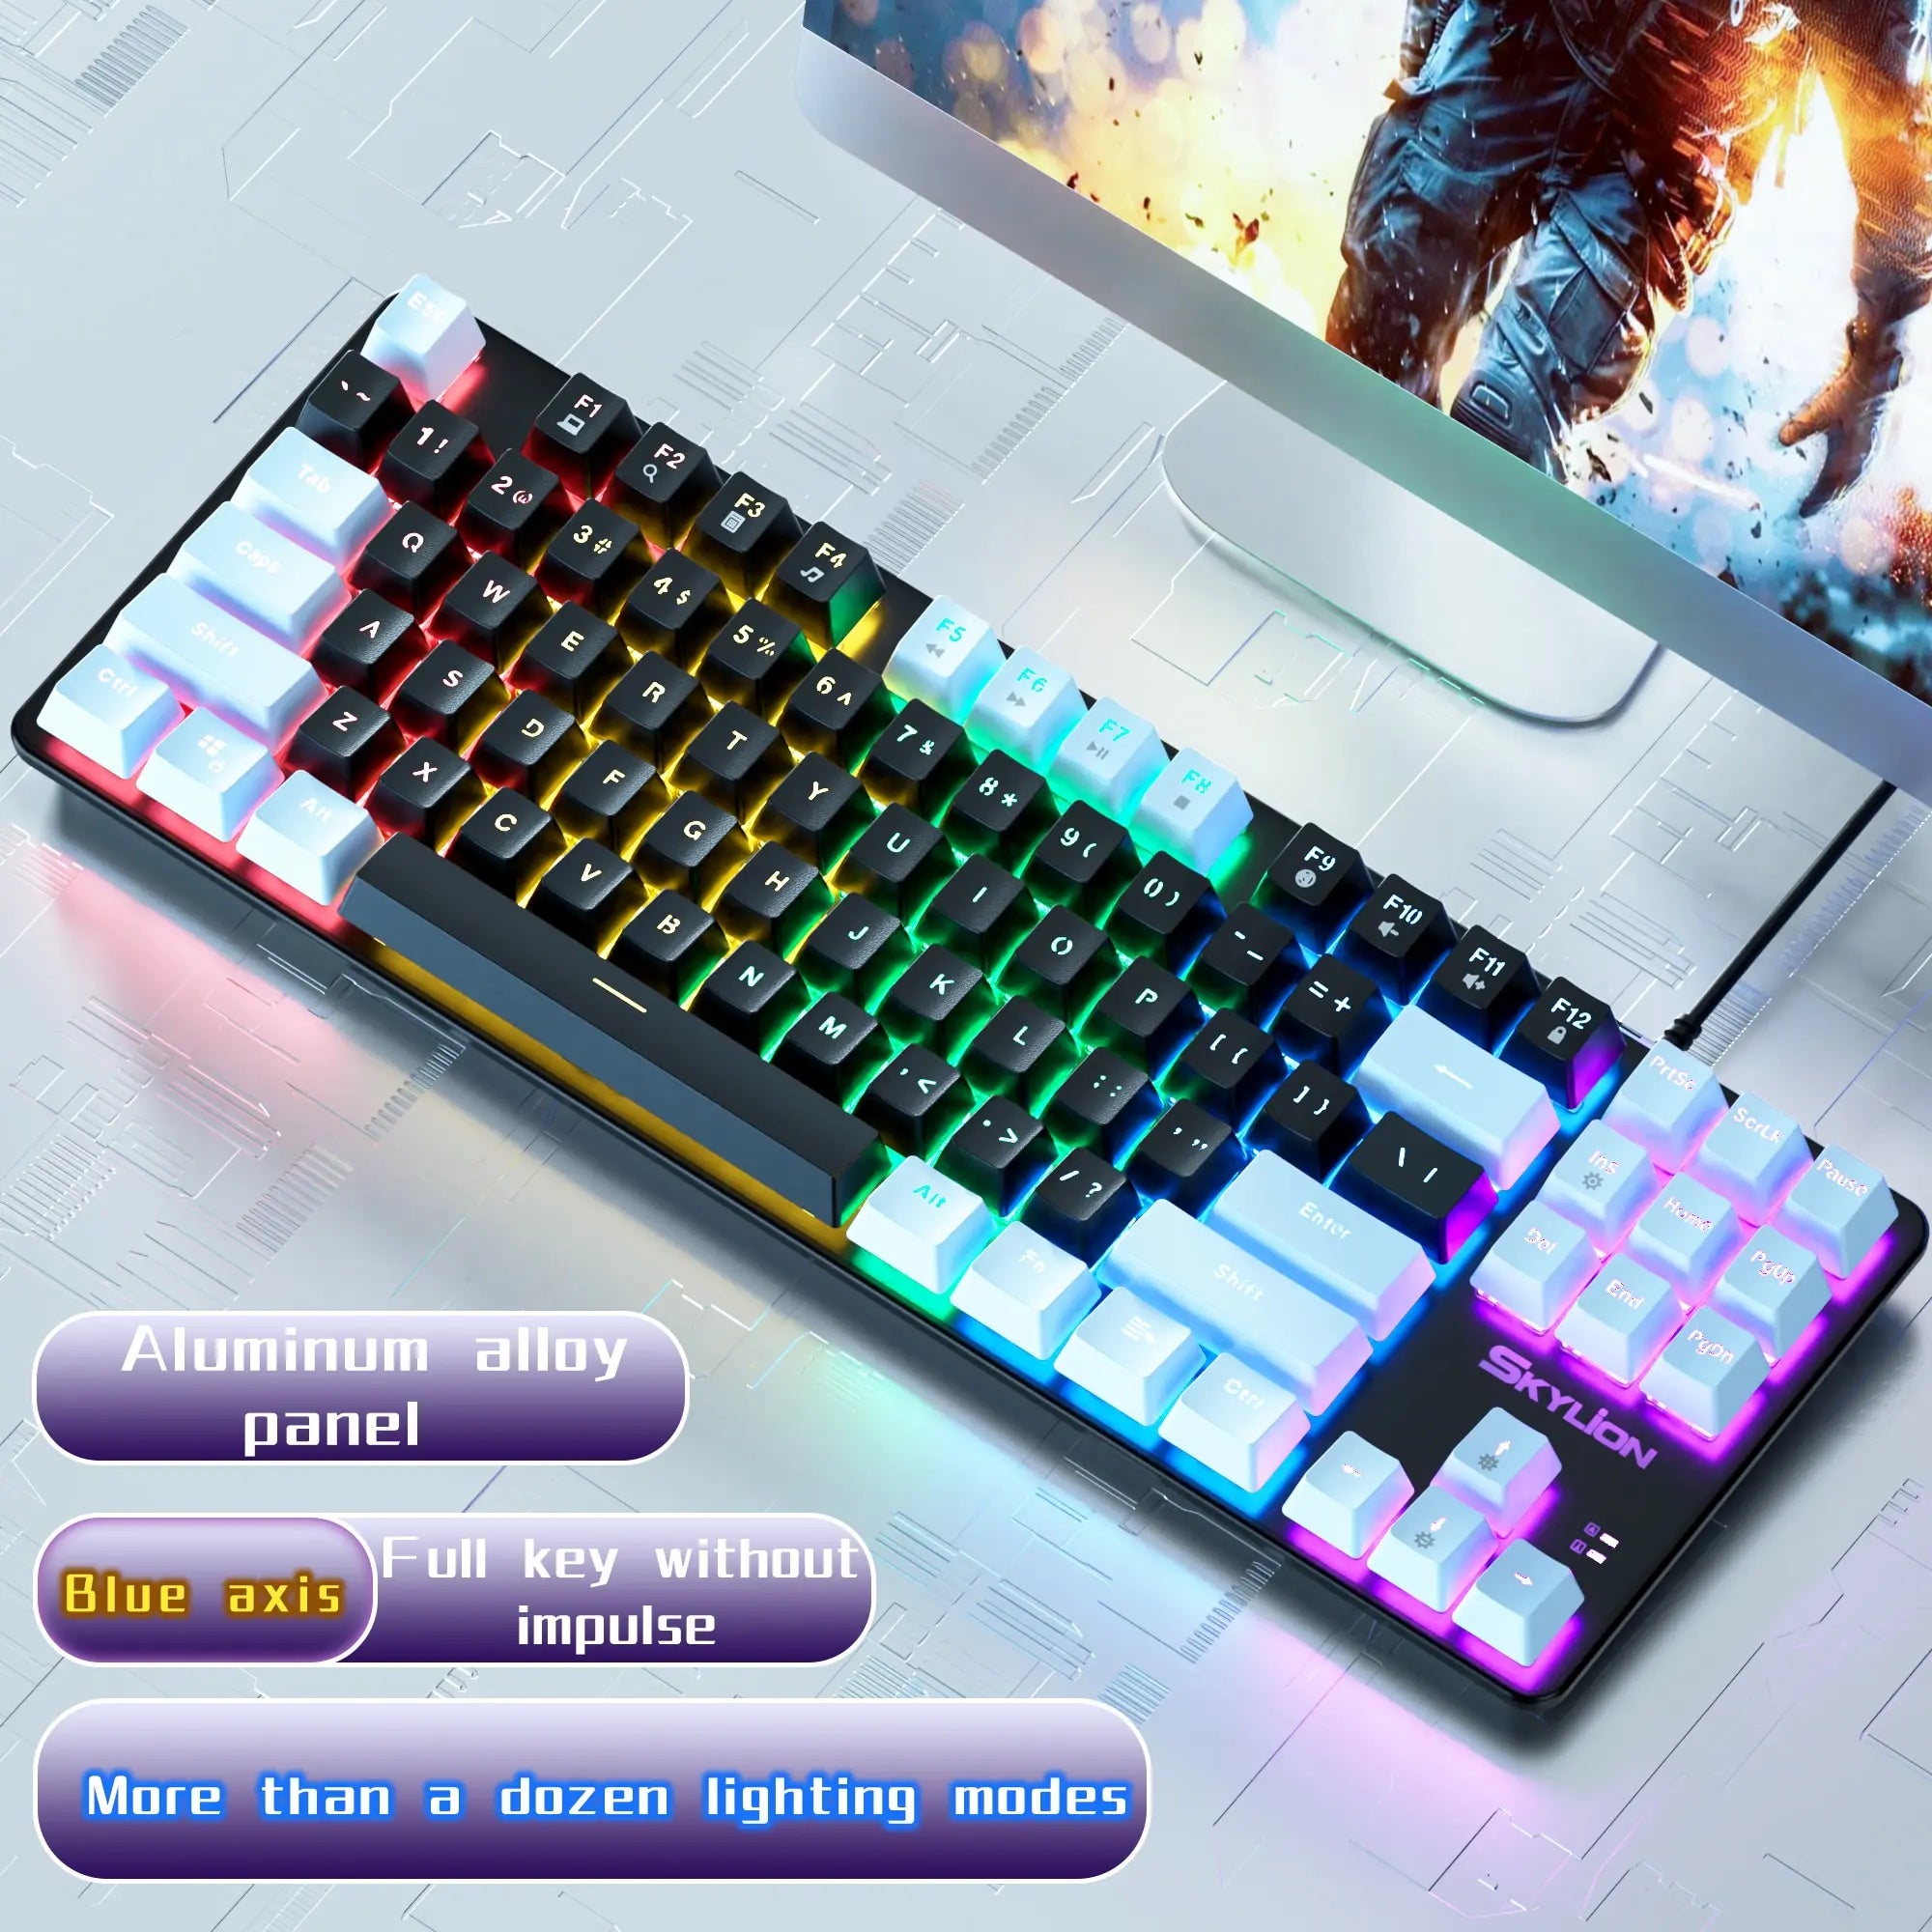 SKYLION H87 Wired Mechanical Keyboard: 10 Colorful Lighting Modes for Gaming & Office | Compatible with Windows & iOS Green Shaft / black-blue